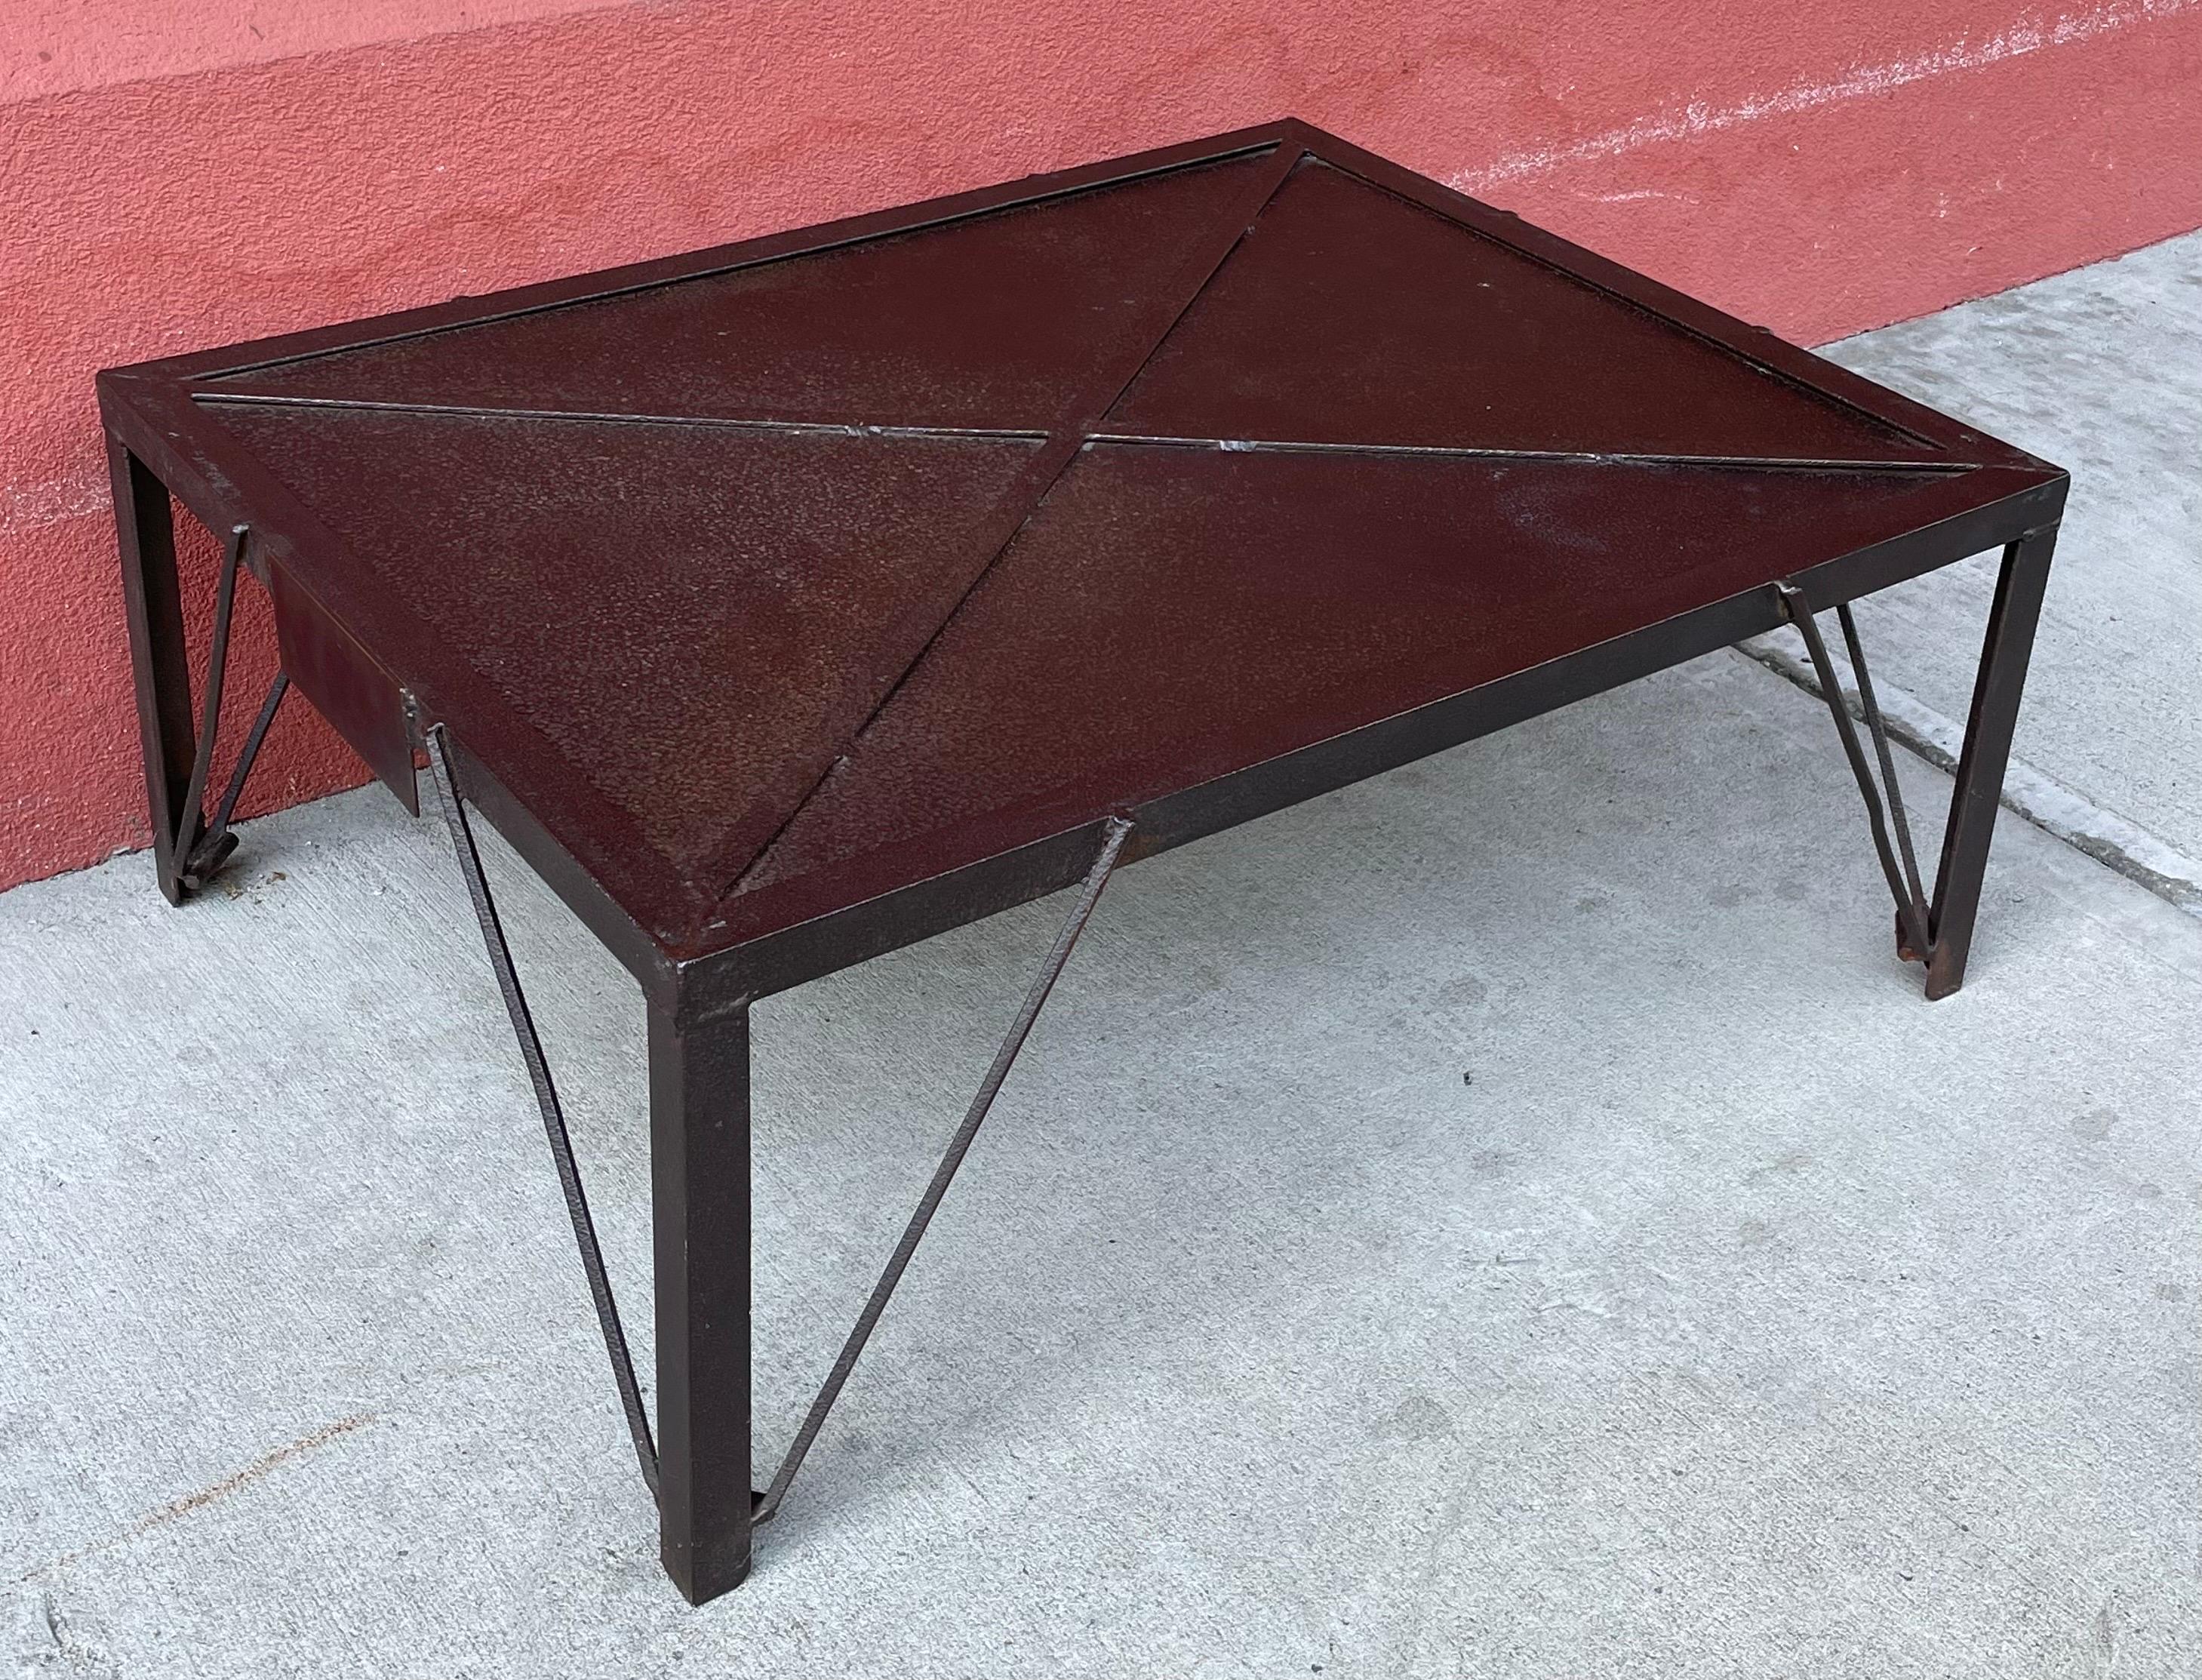 Vintage industrial coffee table or side table in heavy steel construction, artist unknown.